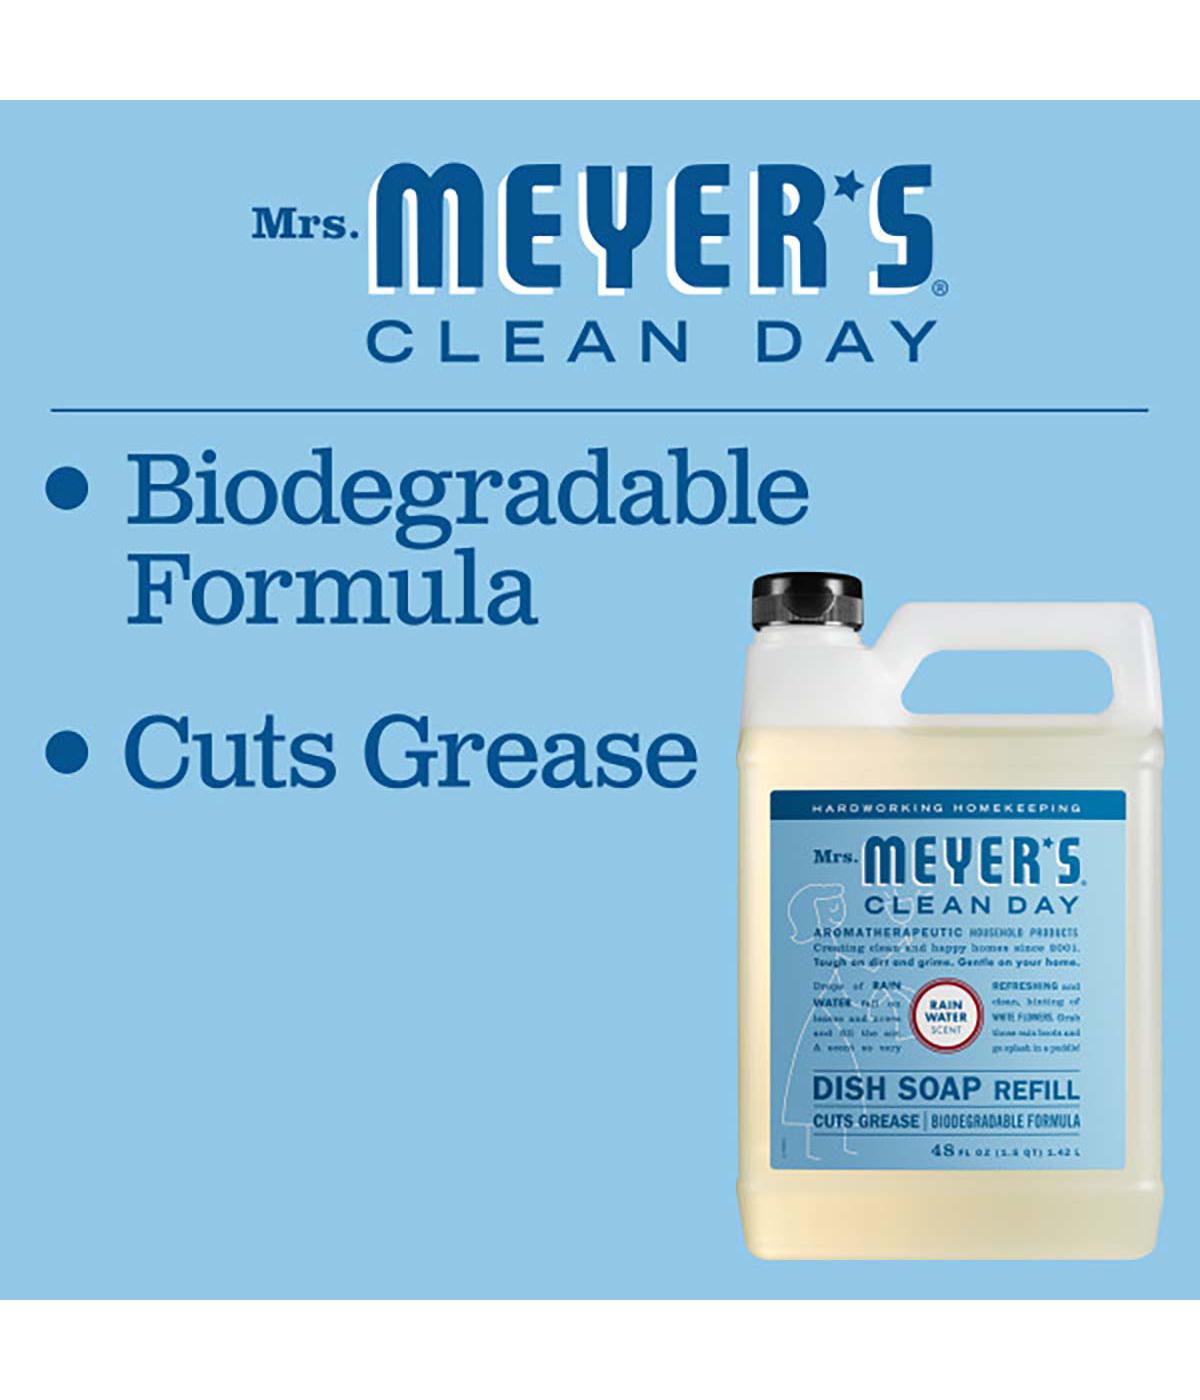 Mrs. Meyer's Clean Day Rainwater Dish Soap Refill; image 5 of 6